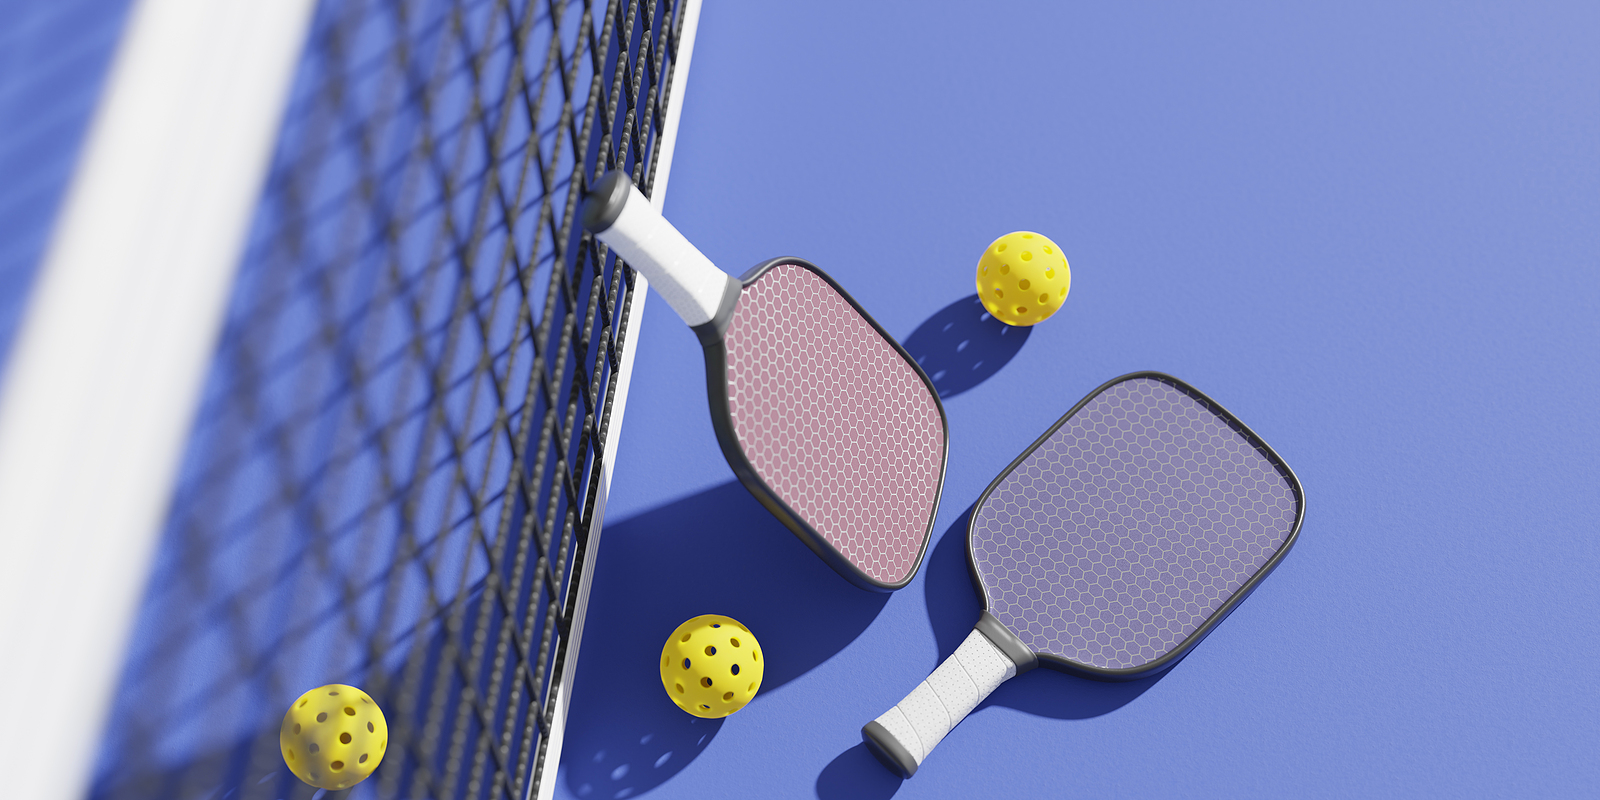 Tournament Pickleball in Las Vegas and areas to Play